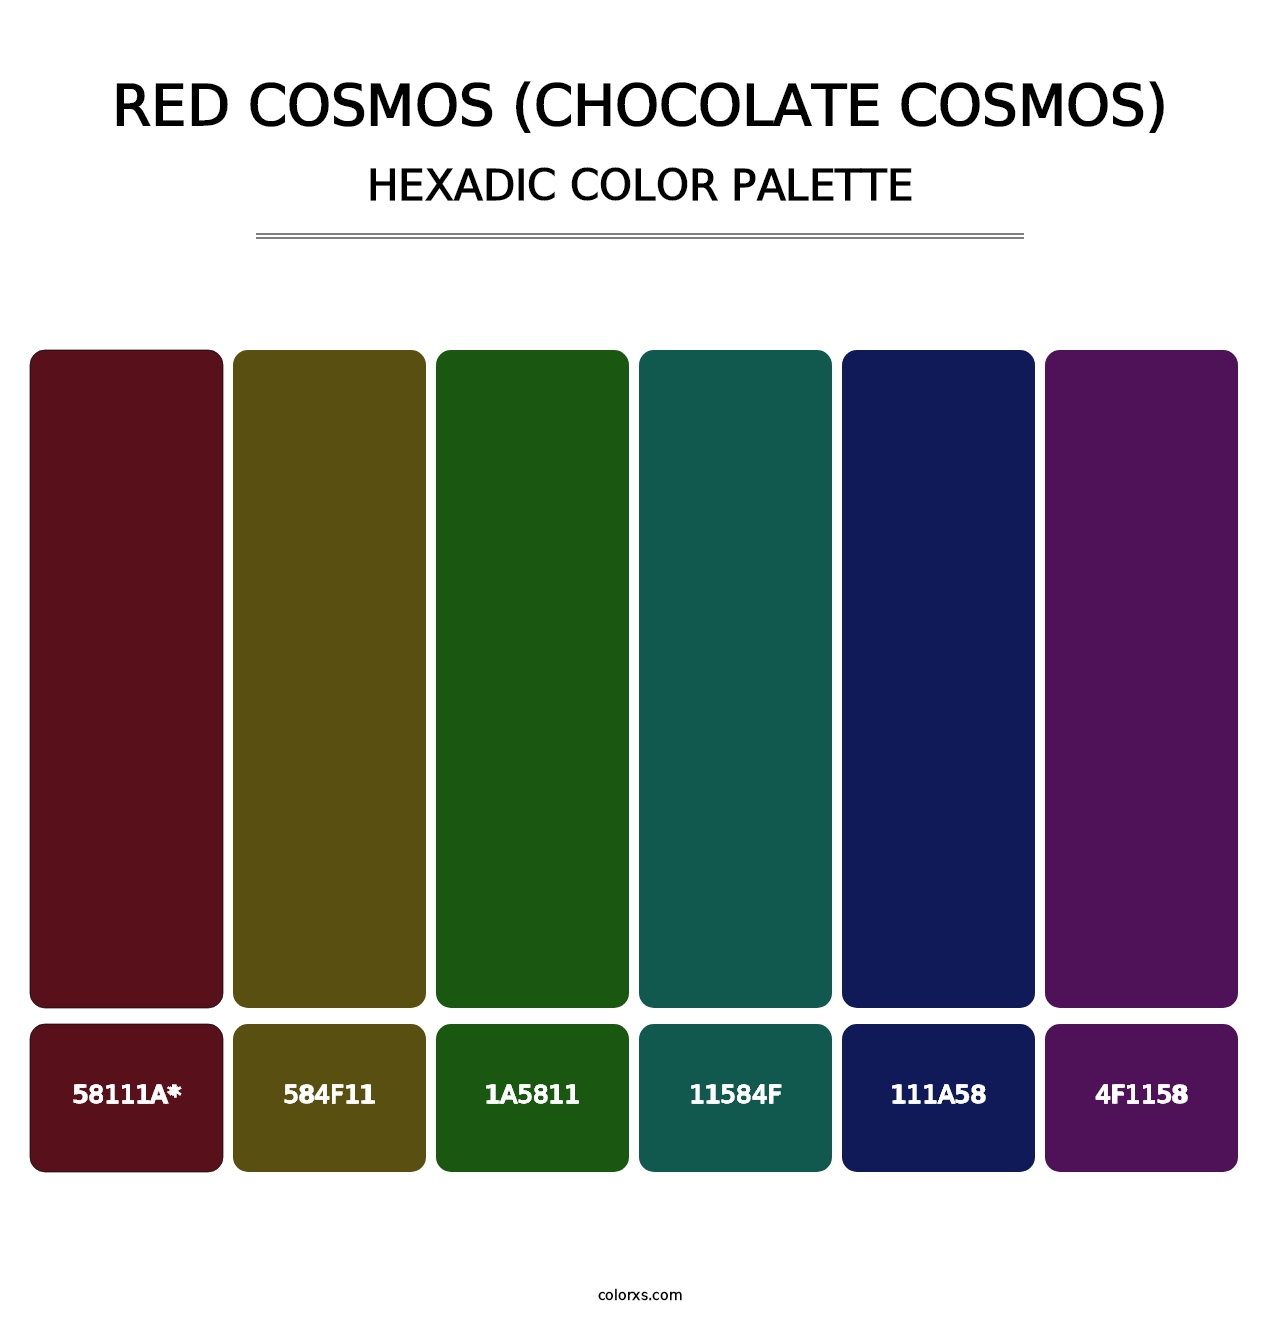 Red Cosmos (Chocolate Cosmos) - Hexadic Color Palette